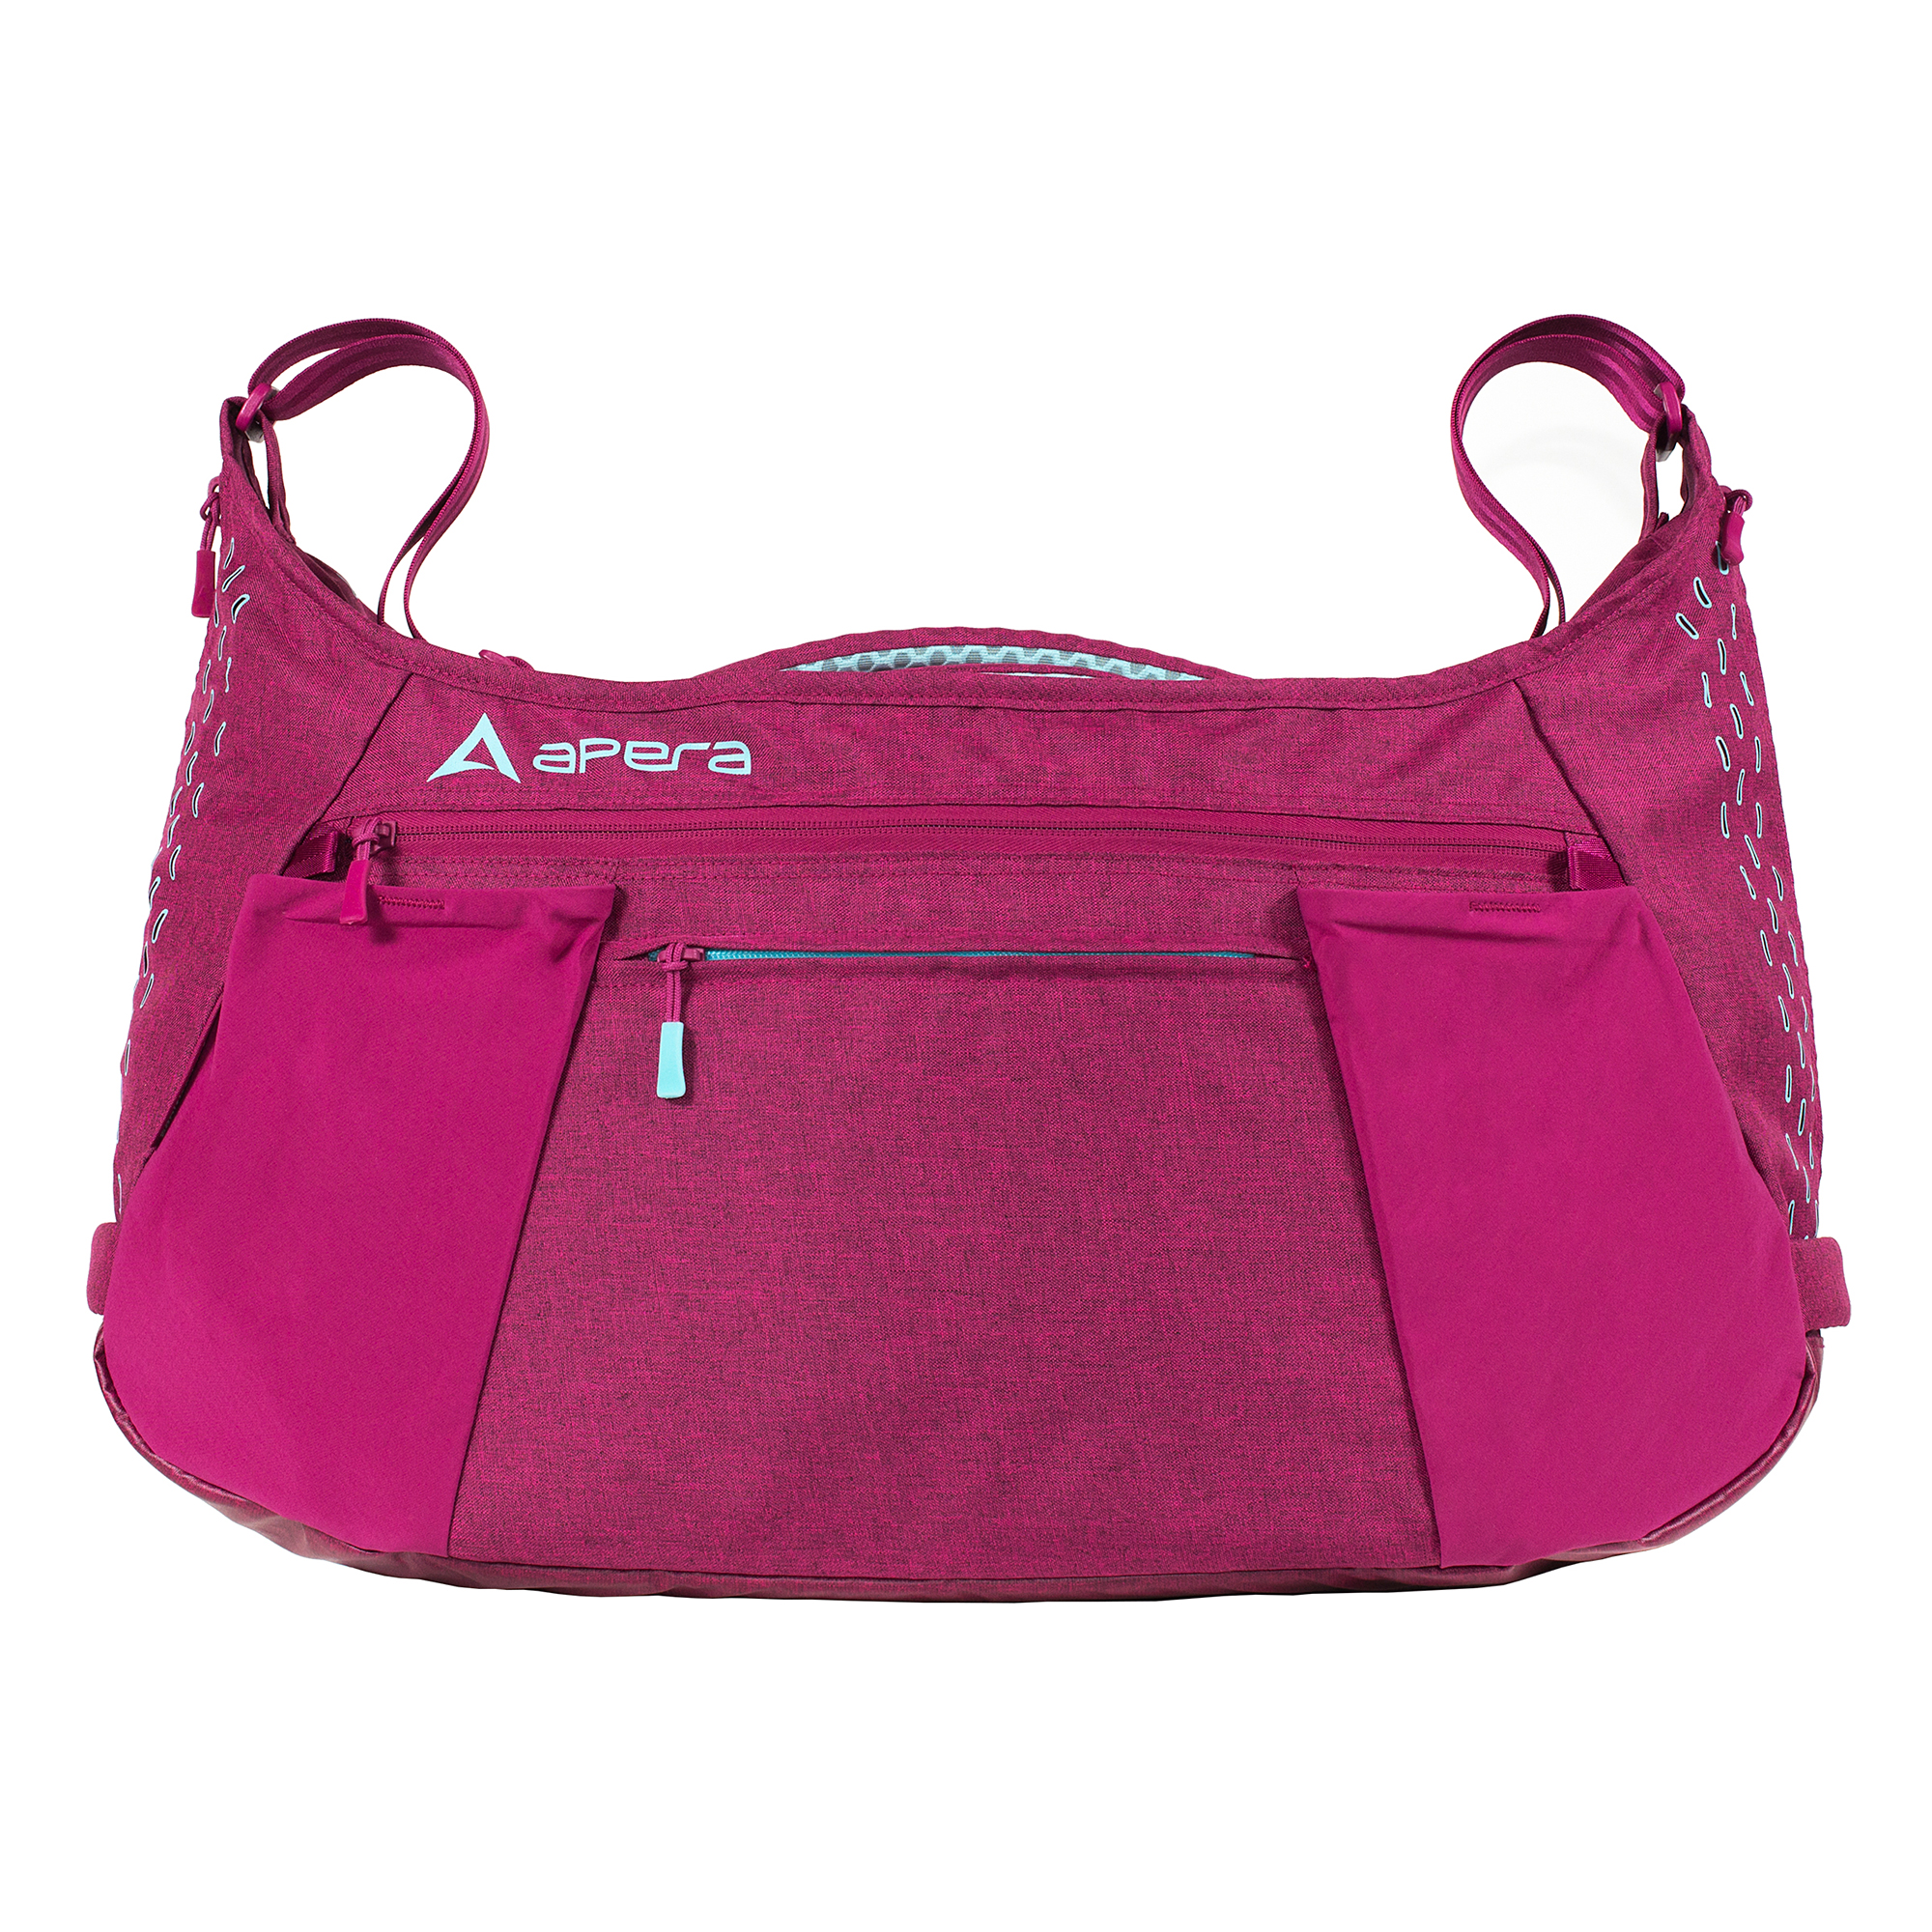 Apera Performance Duffle Powerberry/Arctic Blue Accents - image 1 of 5